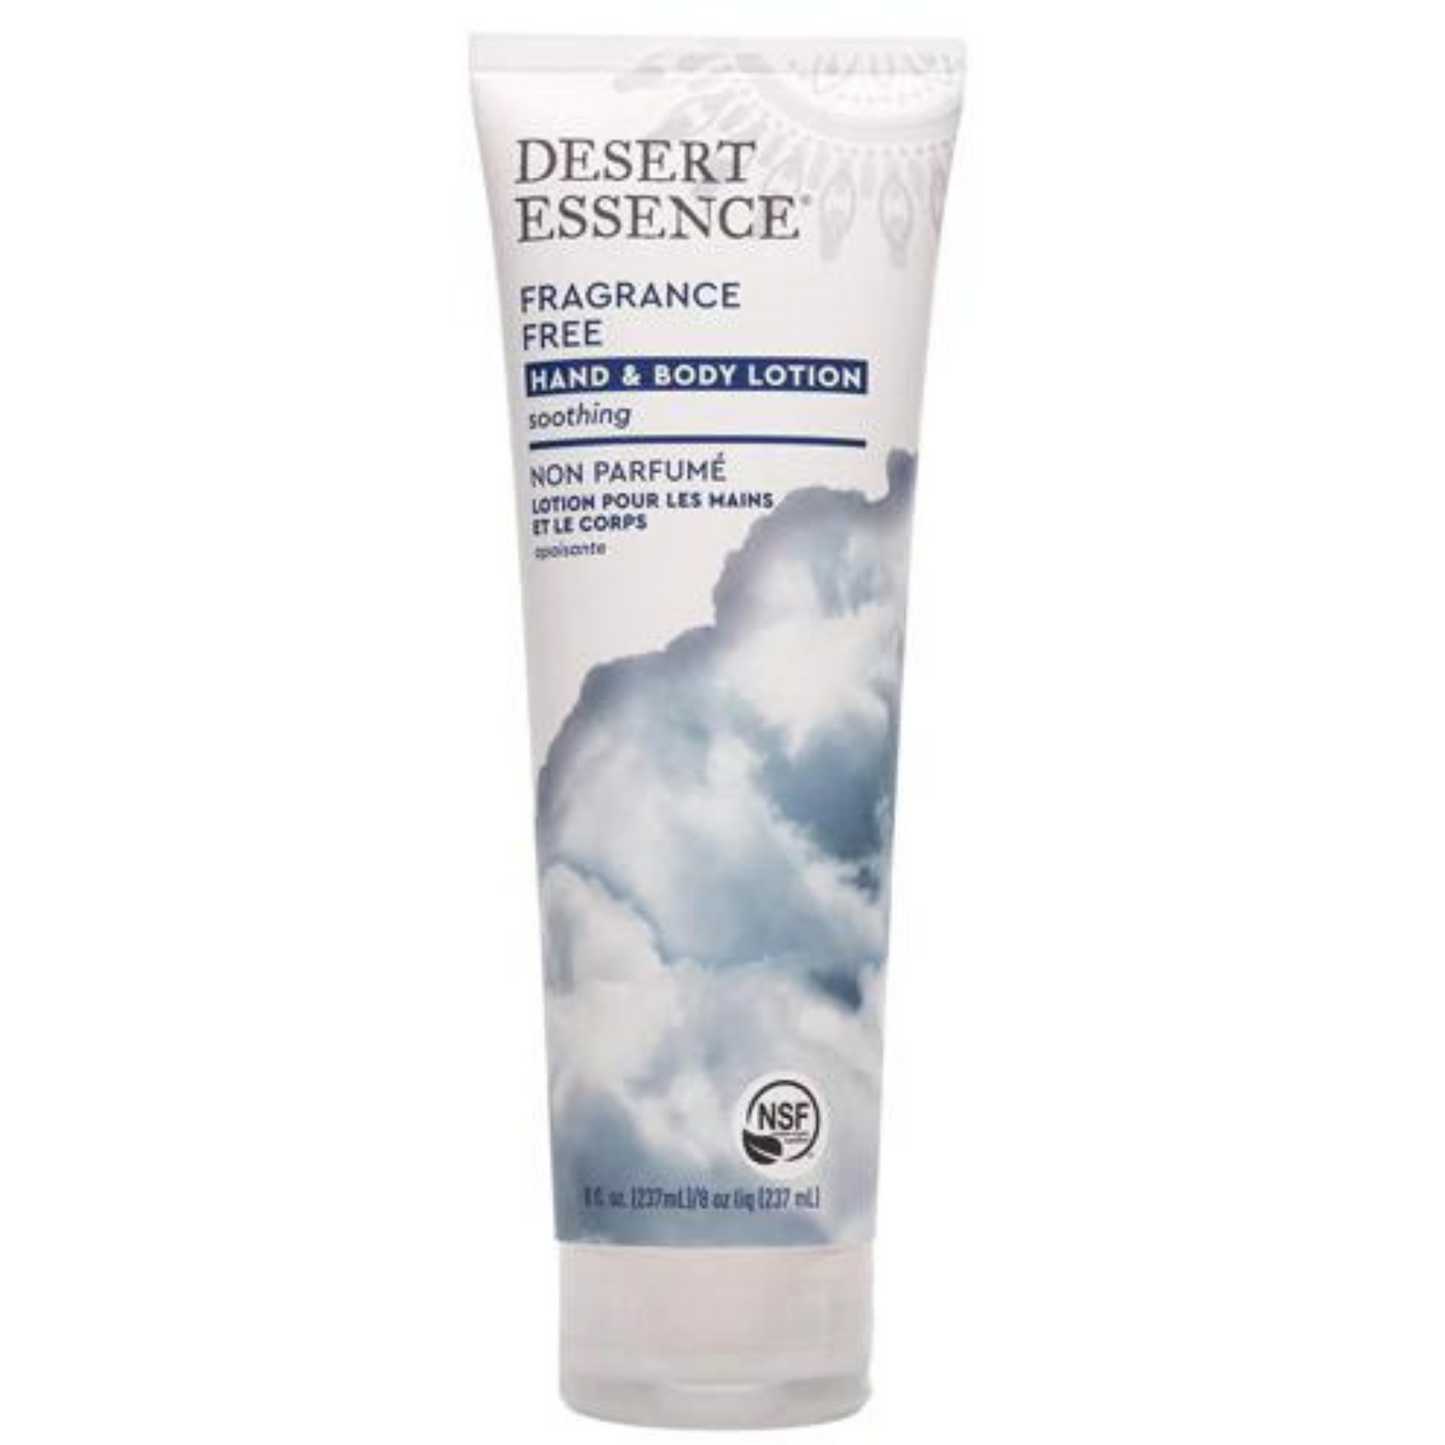 Primary image of Unscented Hand and Body Lotion